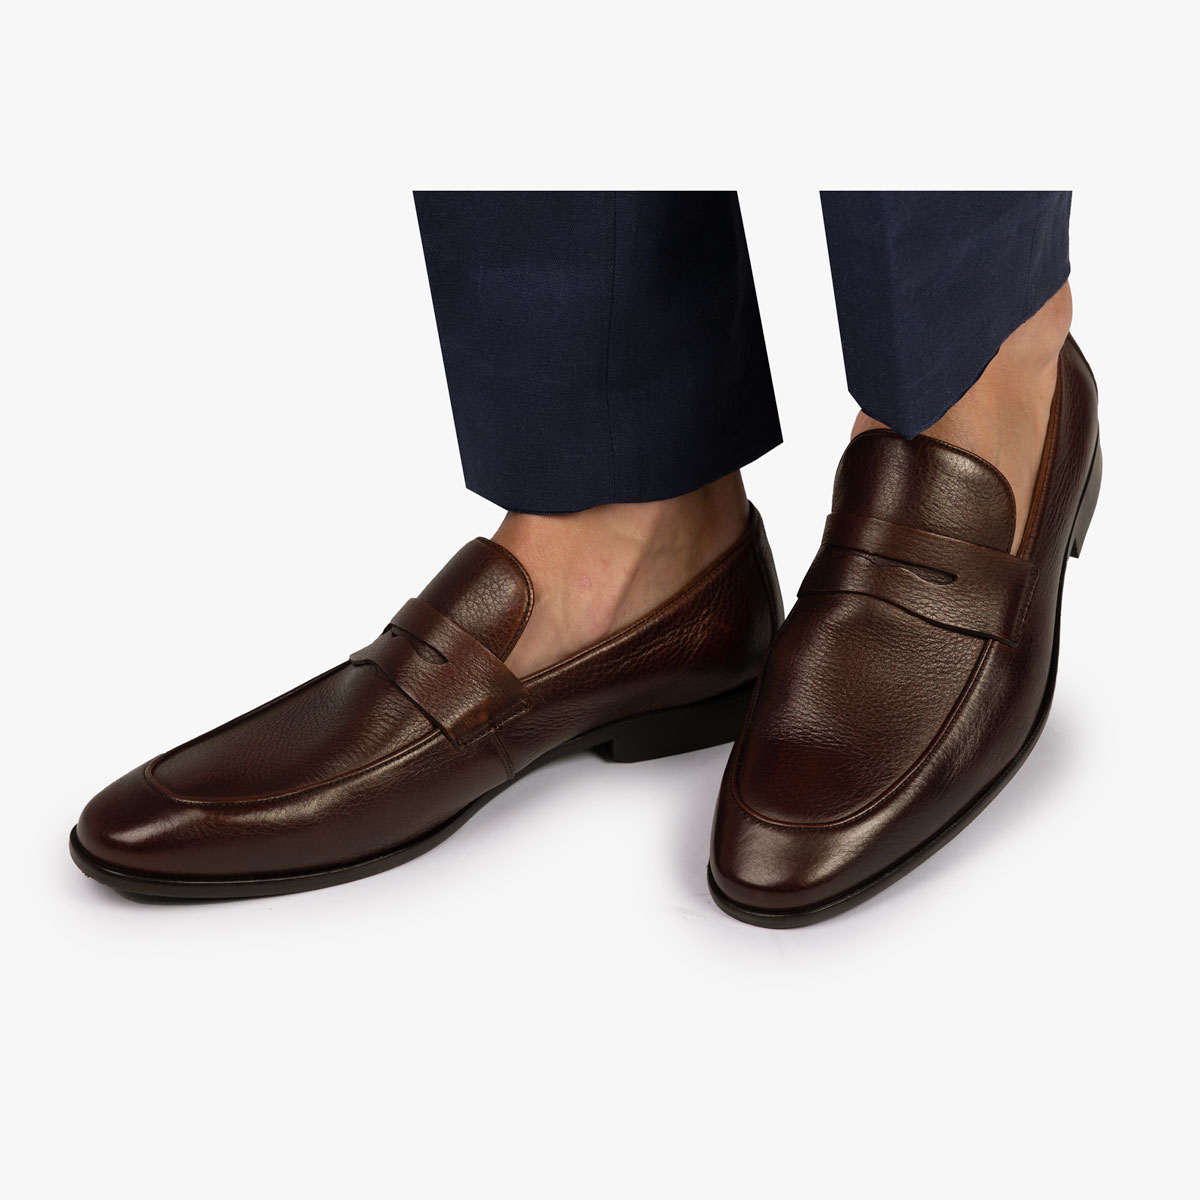 Penny Loafers aus Leder in braun